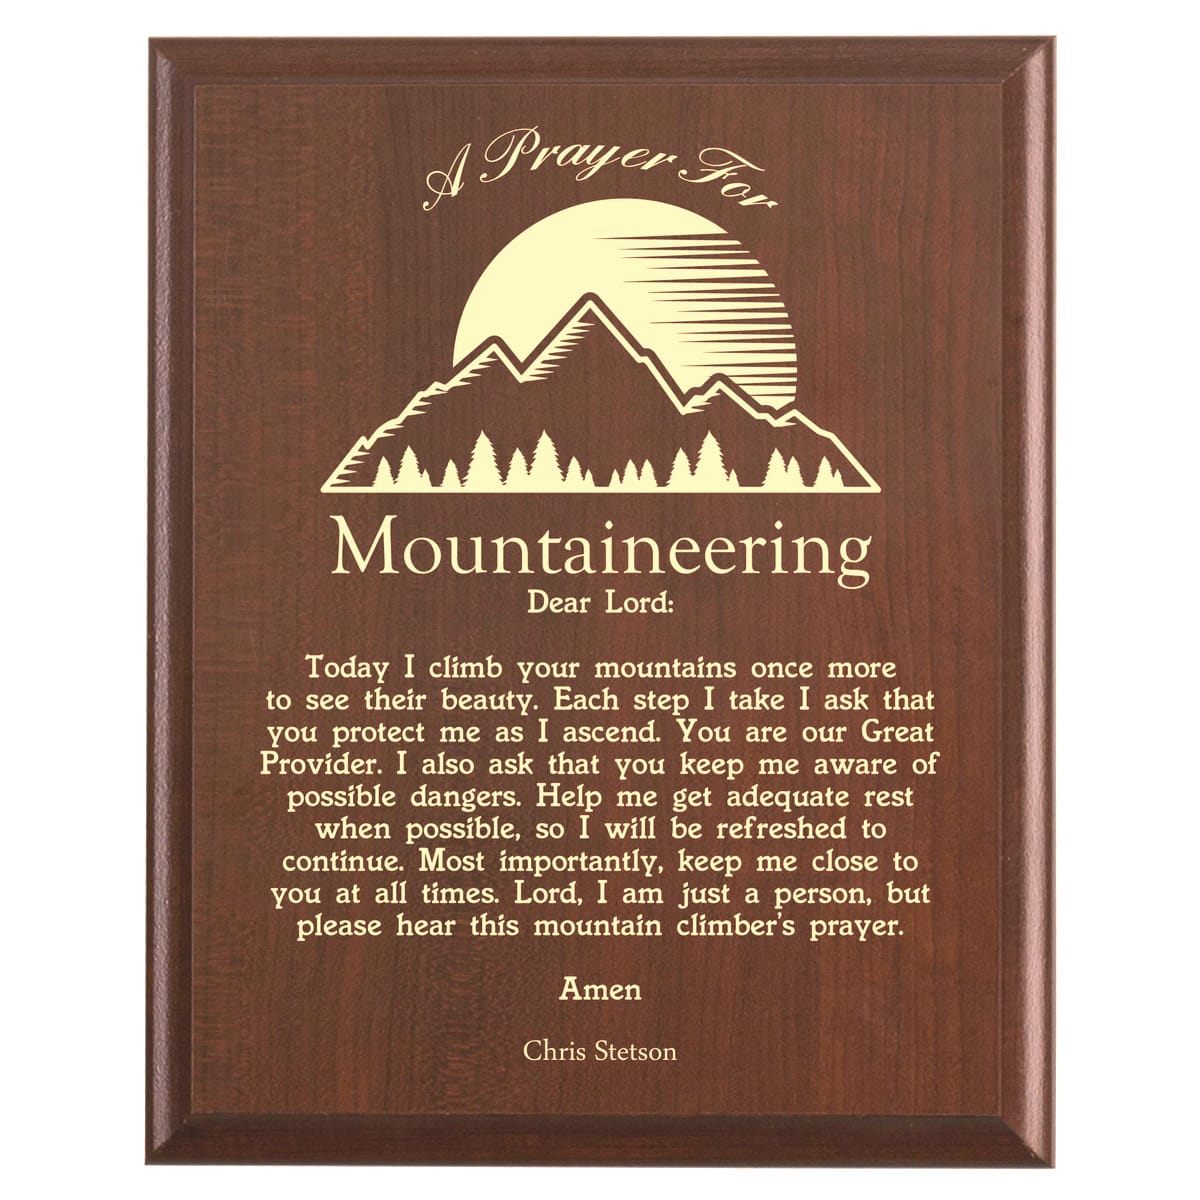 Plaque photo: Mountaineering Prayer Plaque design with free personalization. Wood style finish with customized text.